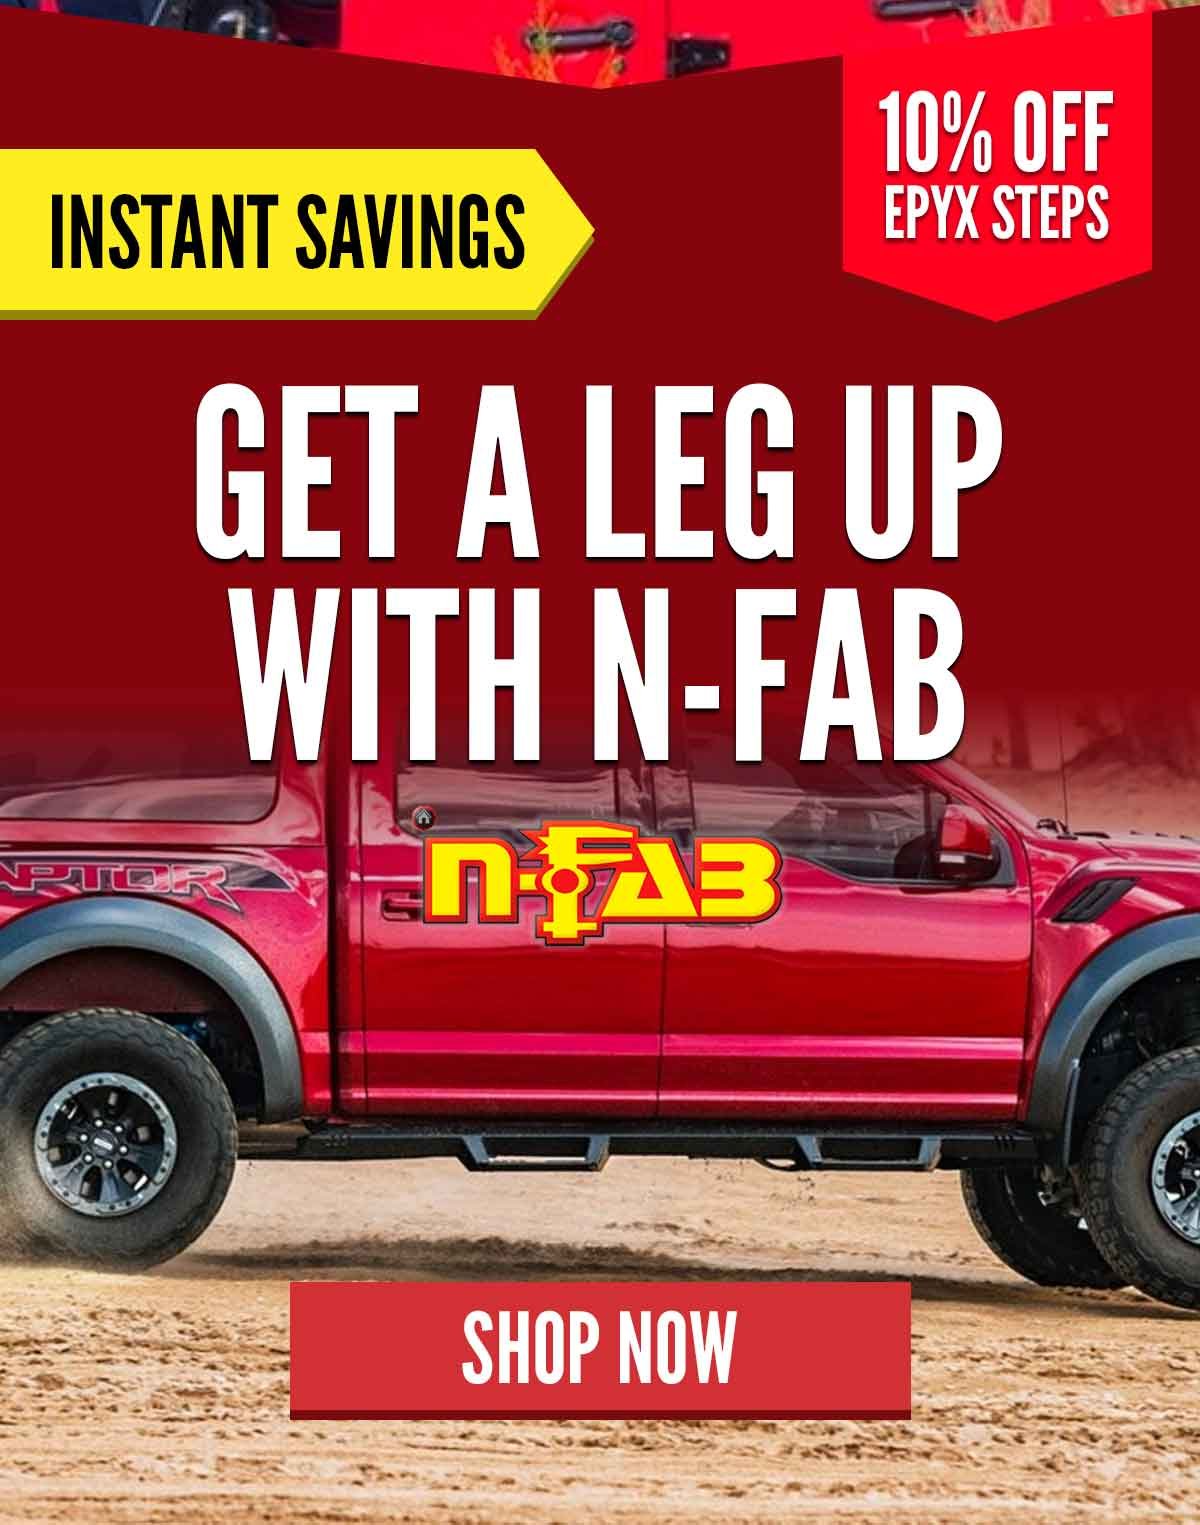 Get A Leg Up With N-Fab